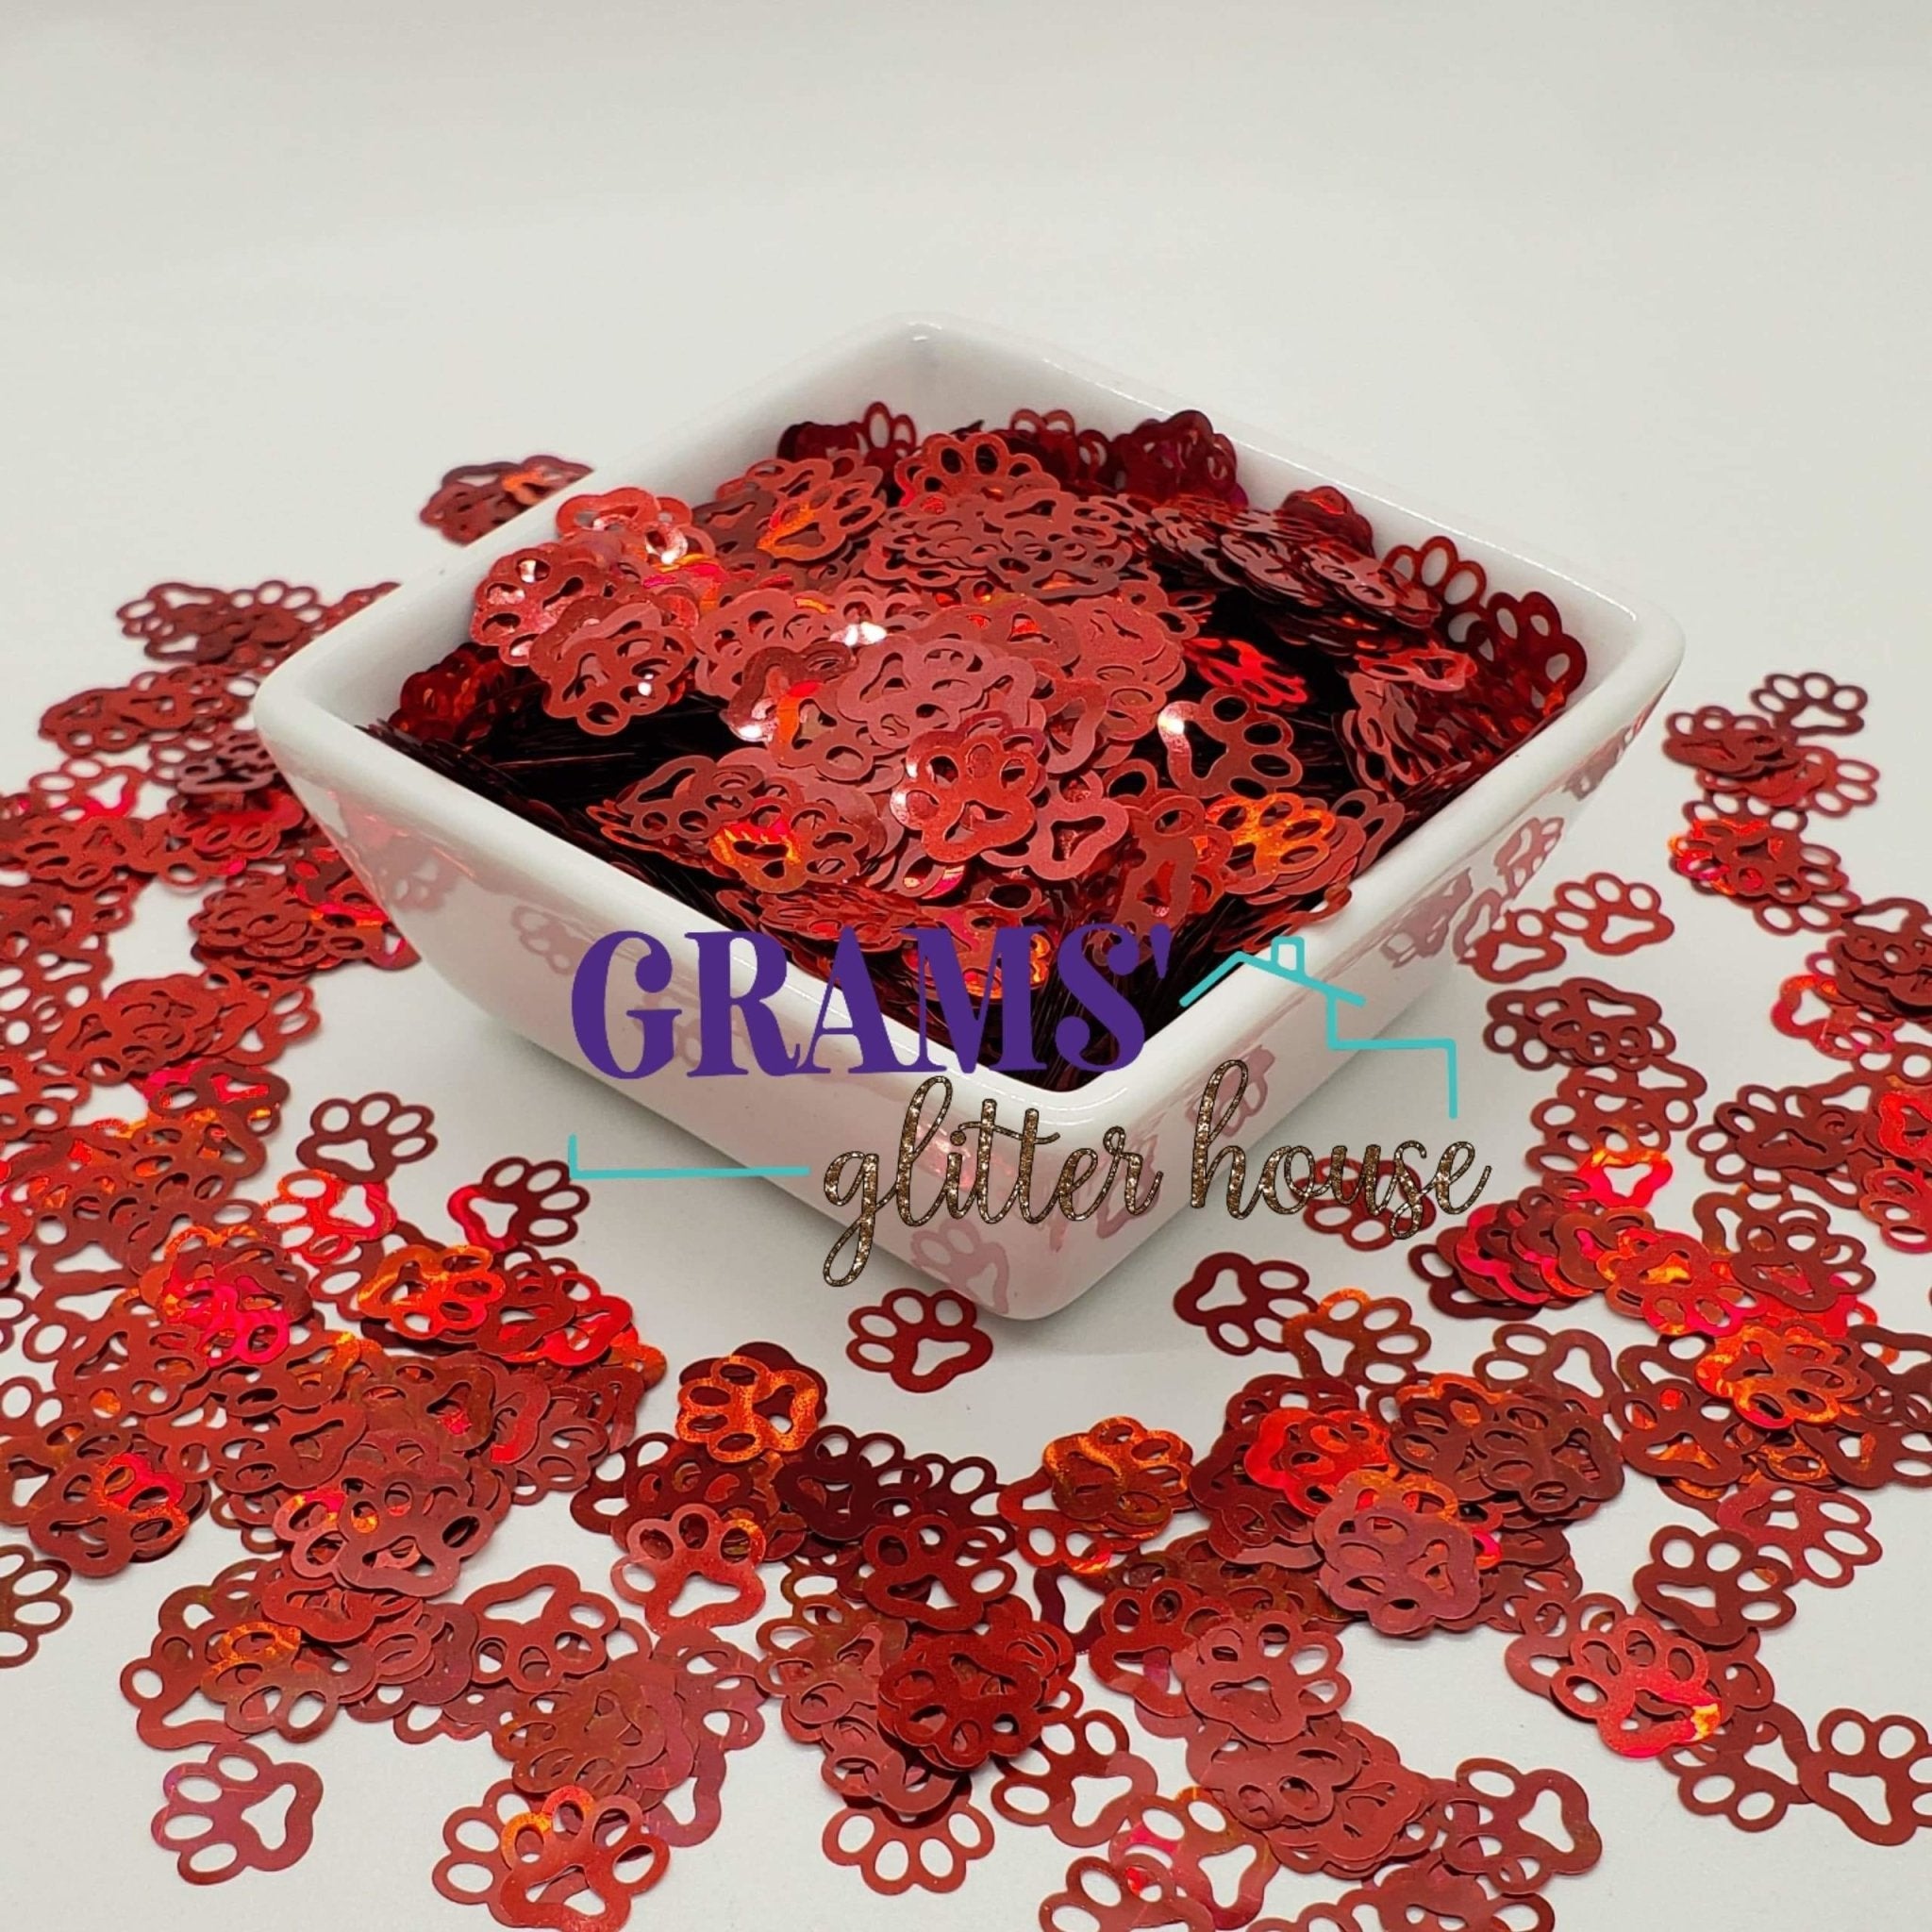 Red 1/2 oz Grams' Glitter House Paw Prints Polyester Glitter